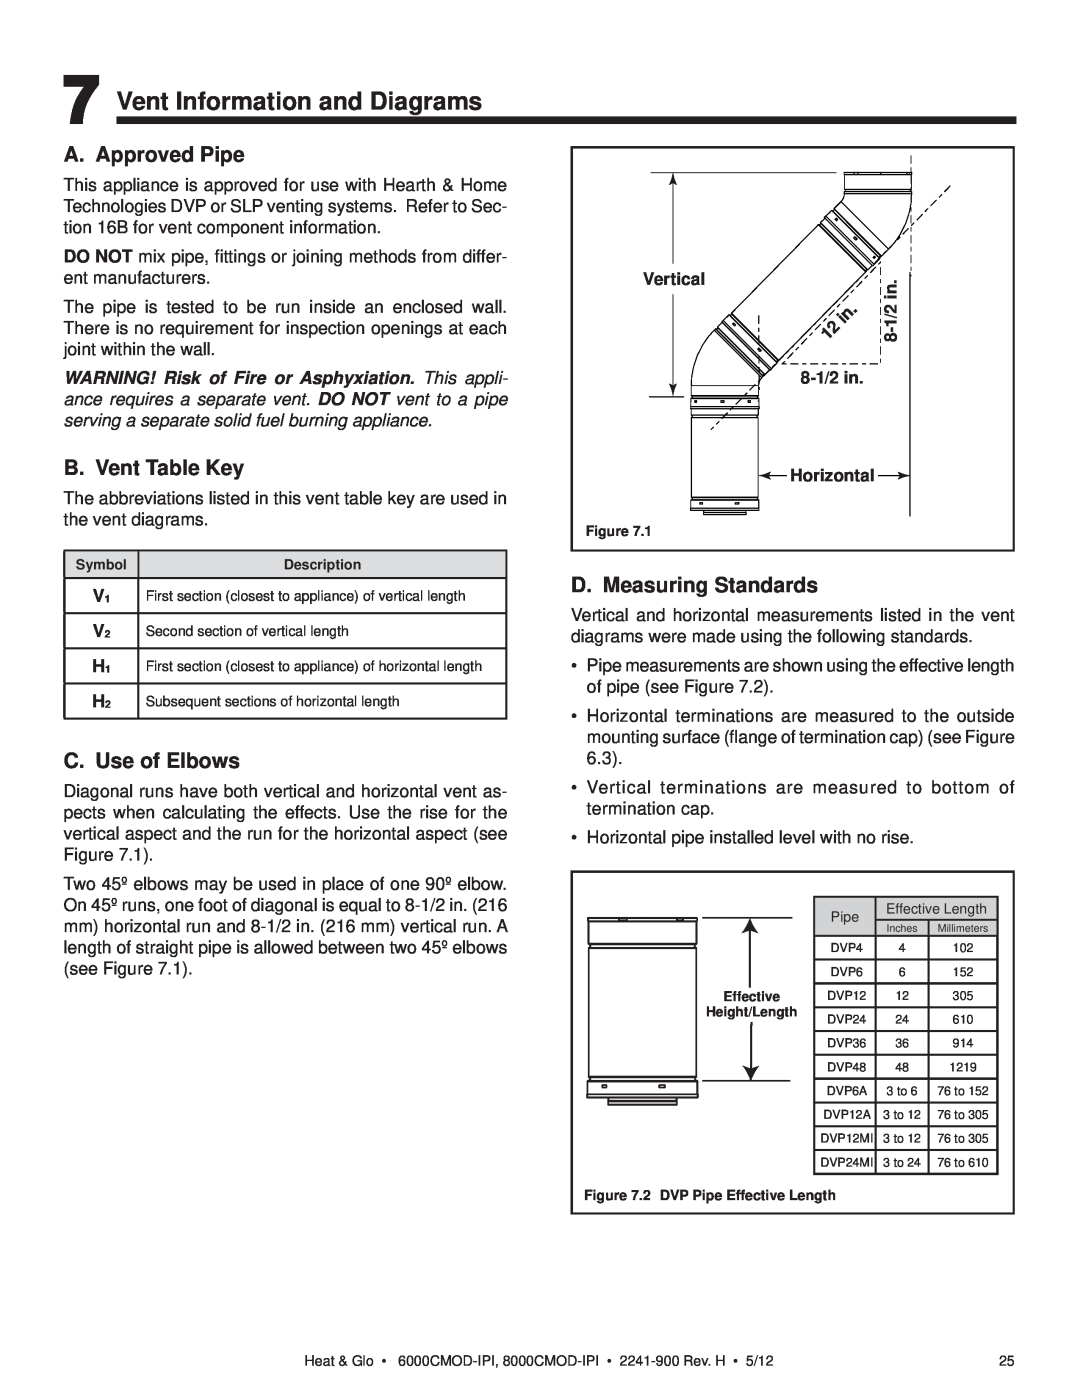 Heat & Glo LifeStyle 6000CMOD-IPI Vent Information and Diagrams, A. Approved Pipe, B. Vent Table Key, C. Use of Elbows 